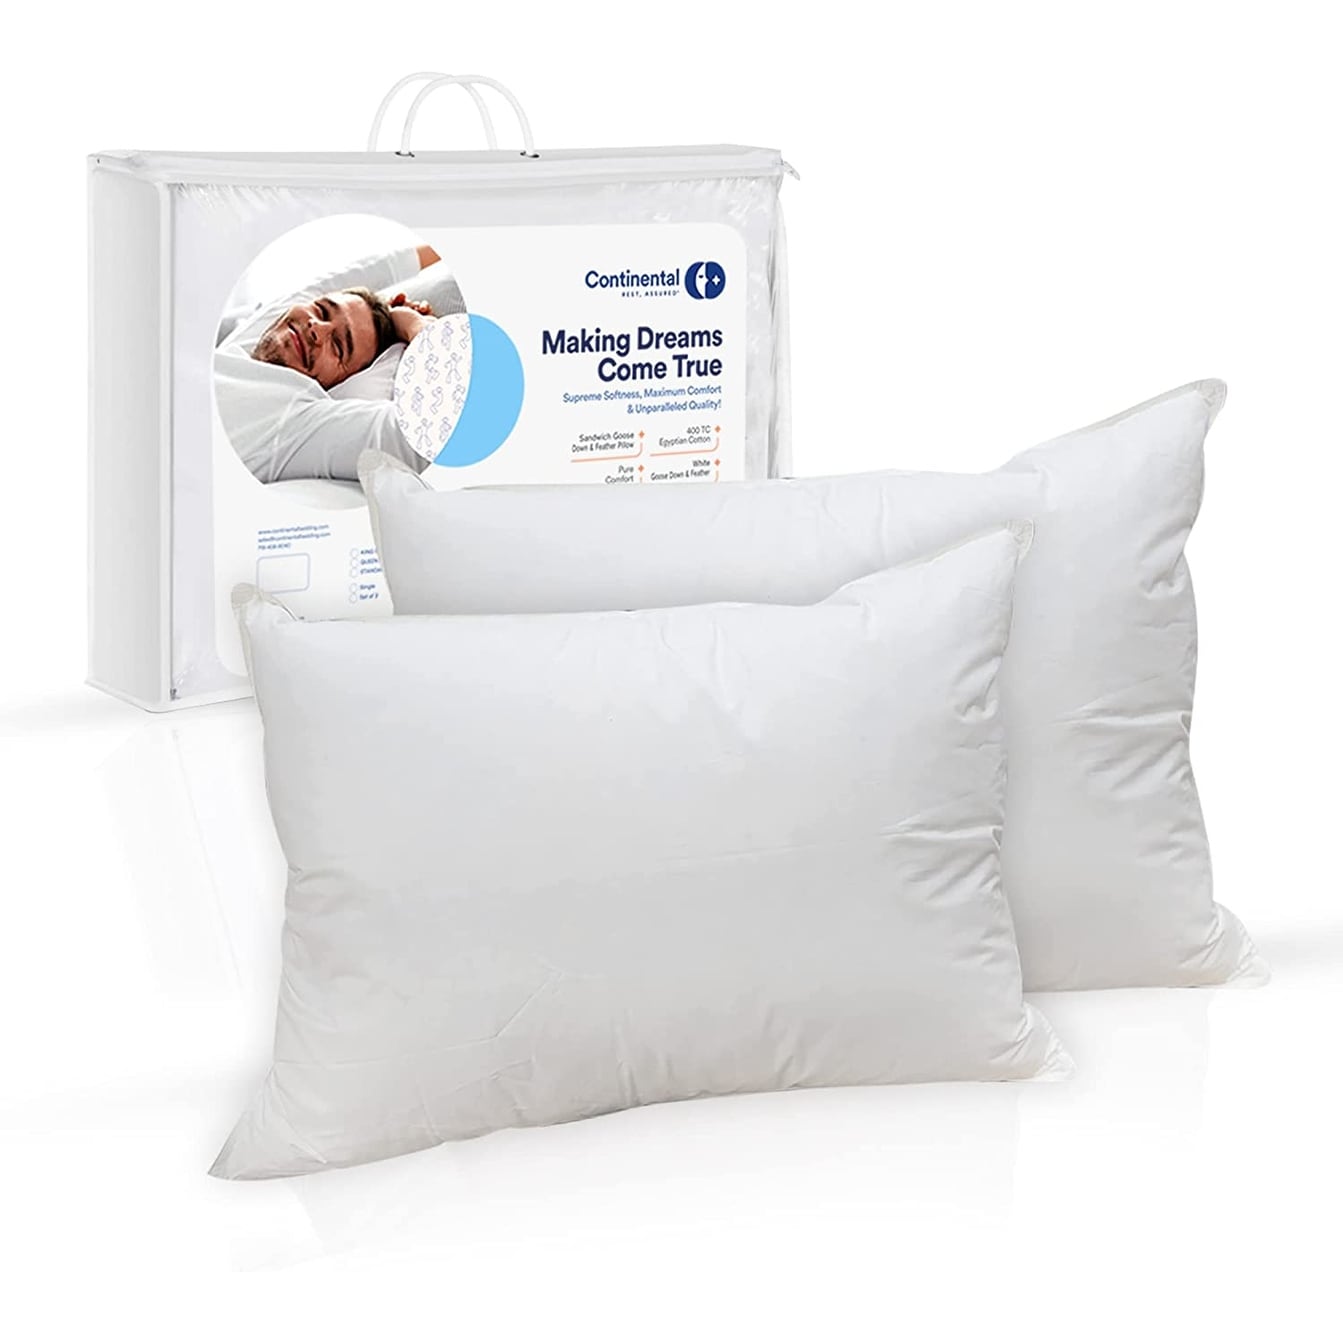 https://ak1.ostkcdn.com/images/products/is/images/direct/08925a1d9539681a94995e09b6ba57c01602d99d/Set-of-2-Double-Down-Surround-Pillows---5-Star-Hotel-Pillow---White.jpg